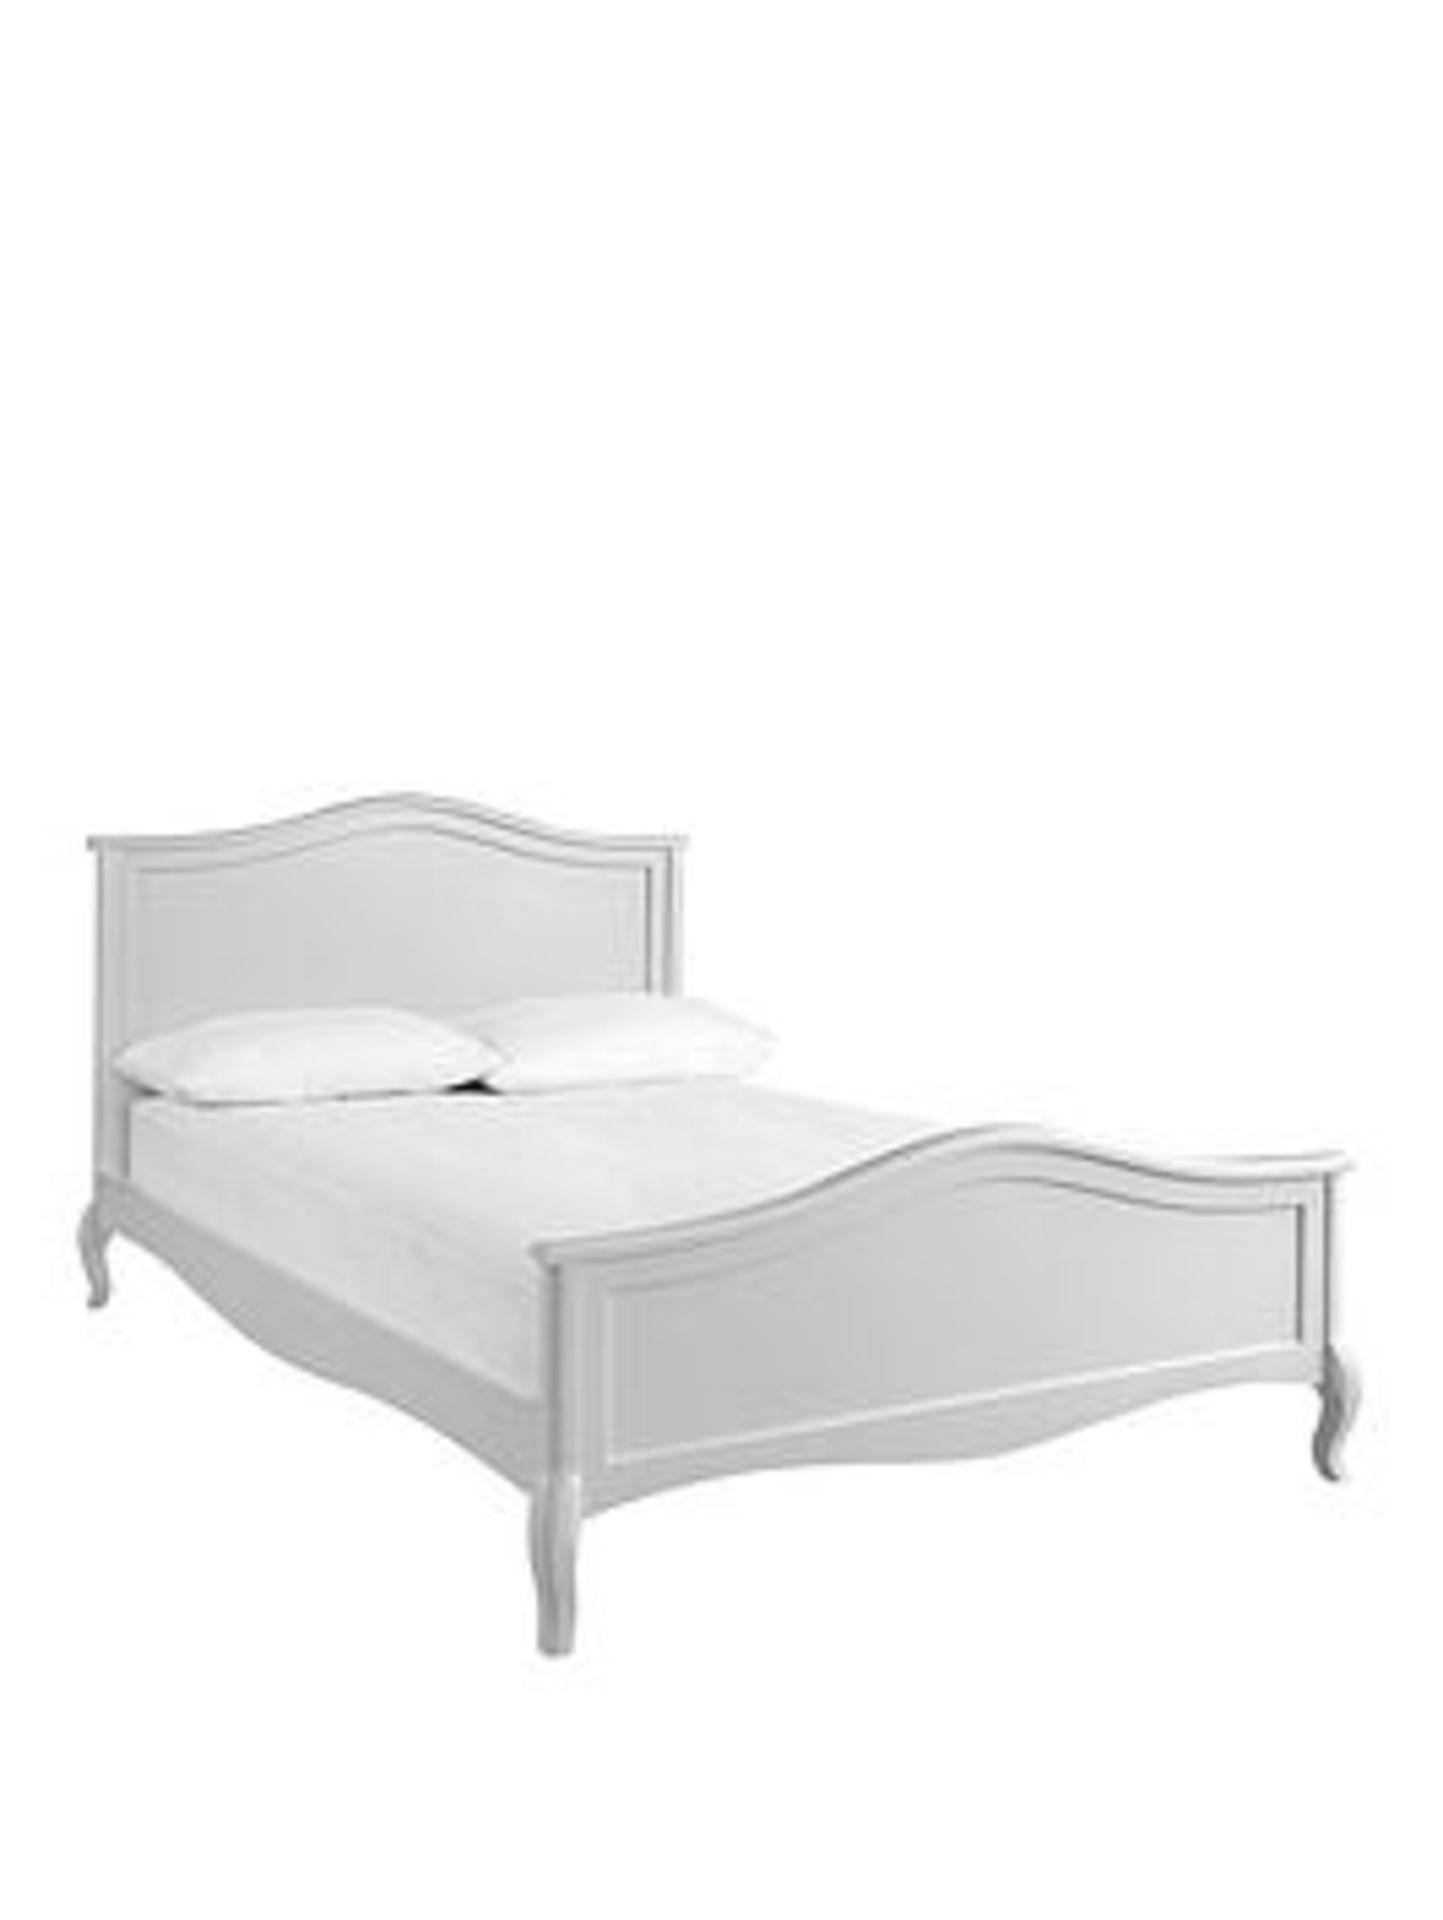 Boxed Item Olivia King Bed [Grey] 110X160X208Cm Rrp:£612.0 - Image 2 of 2